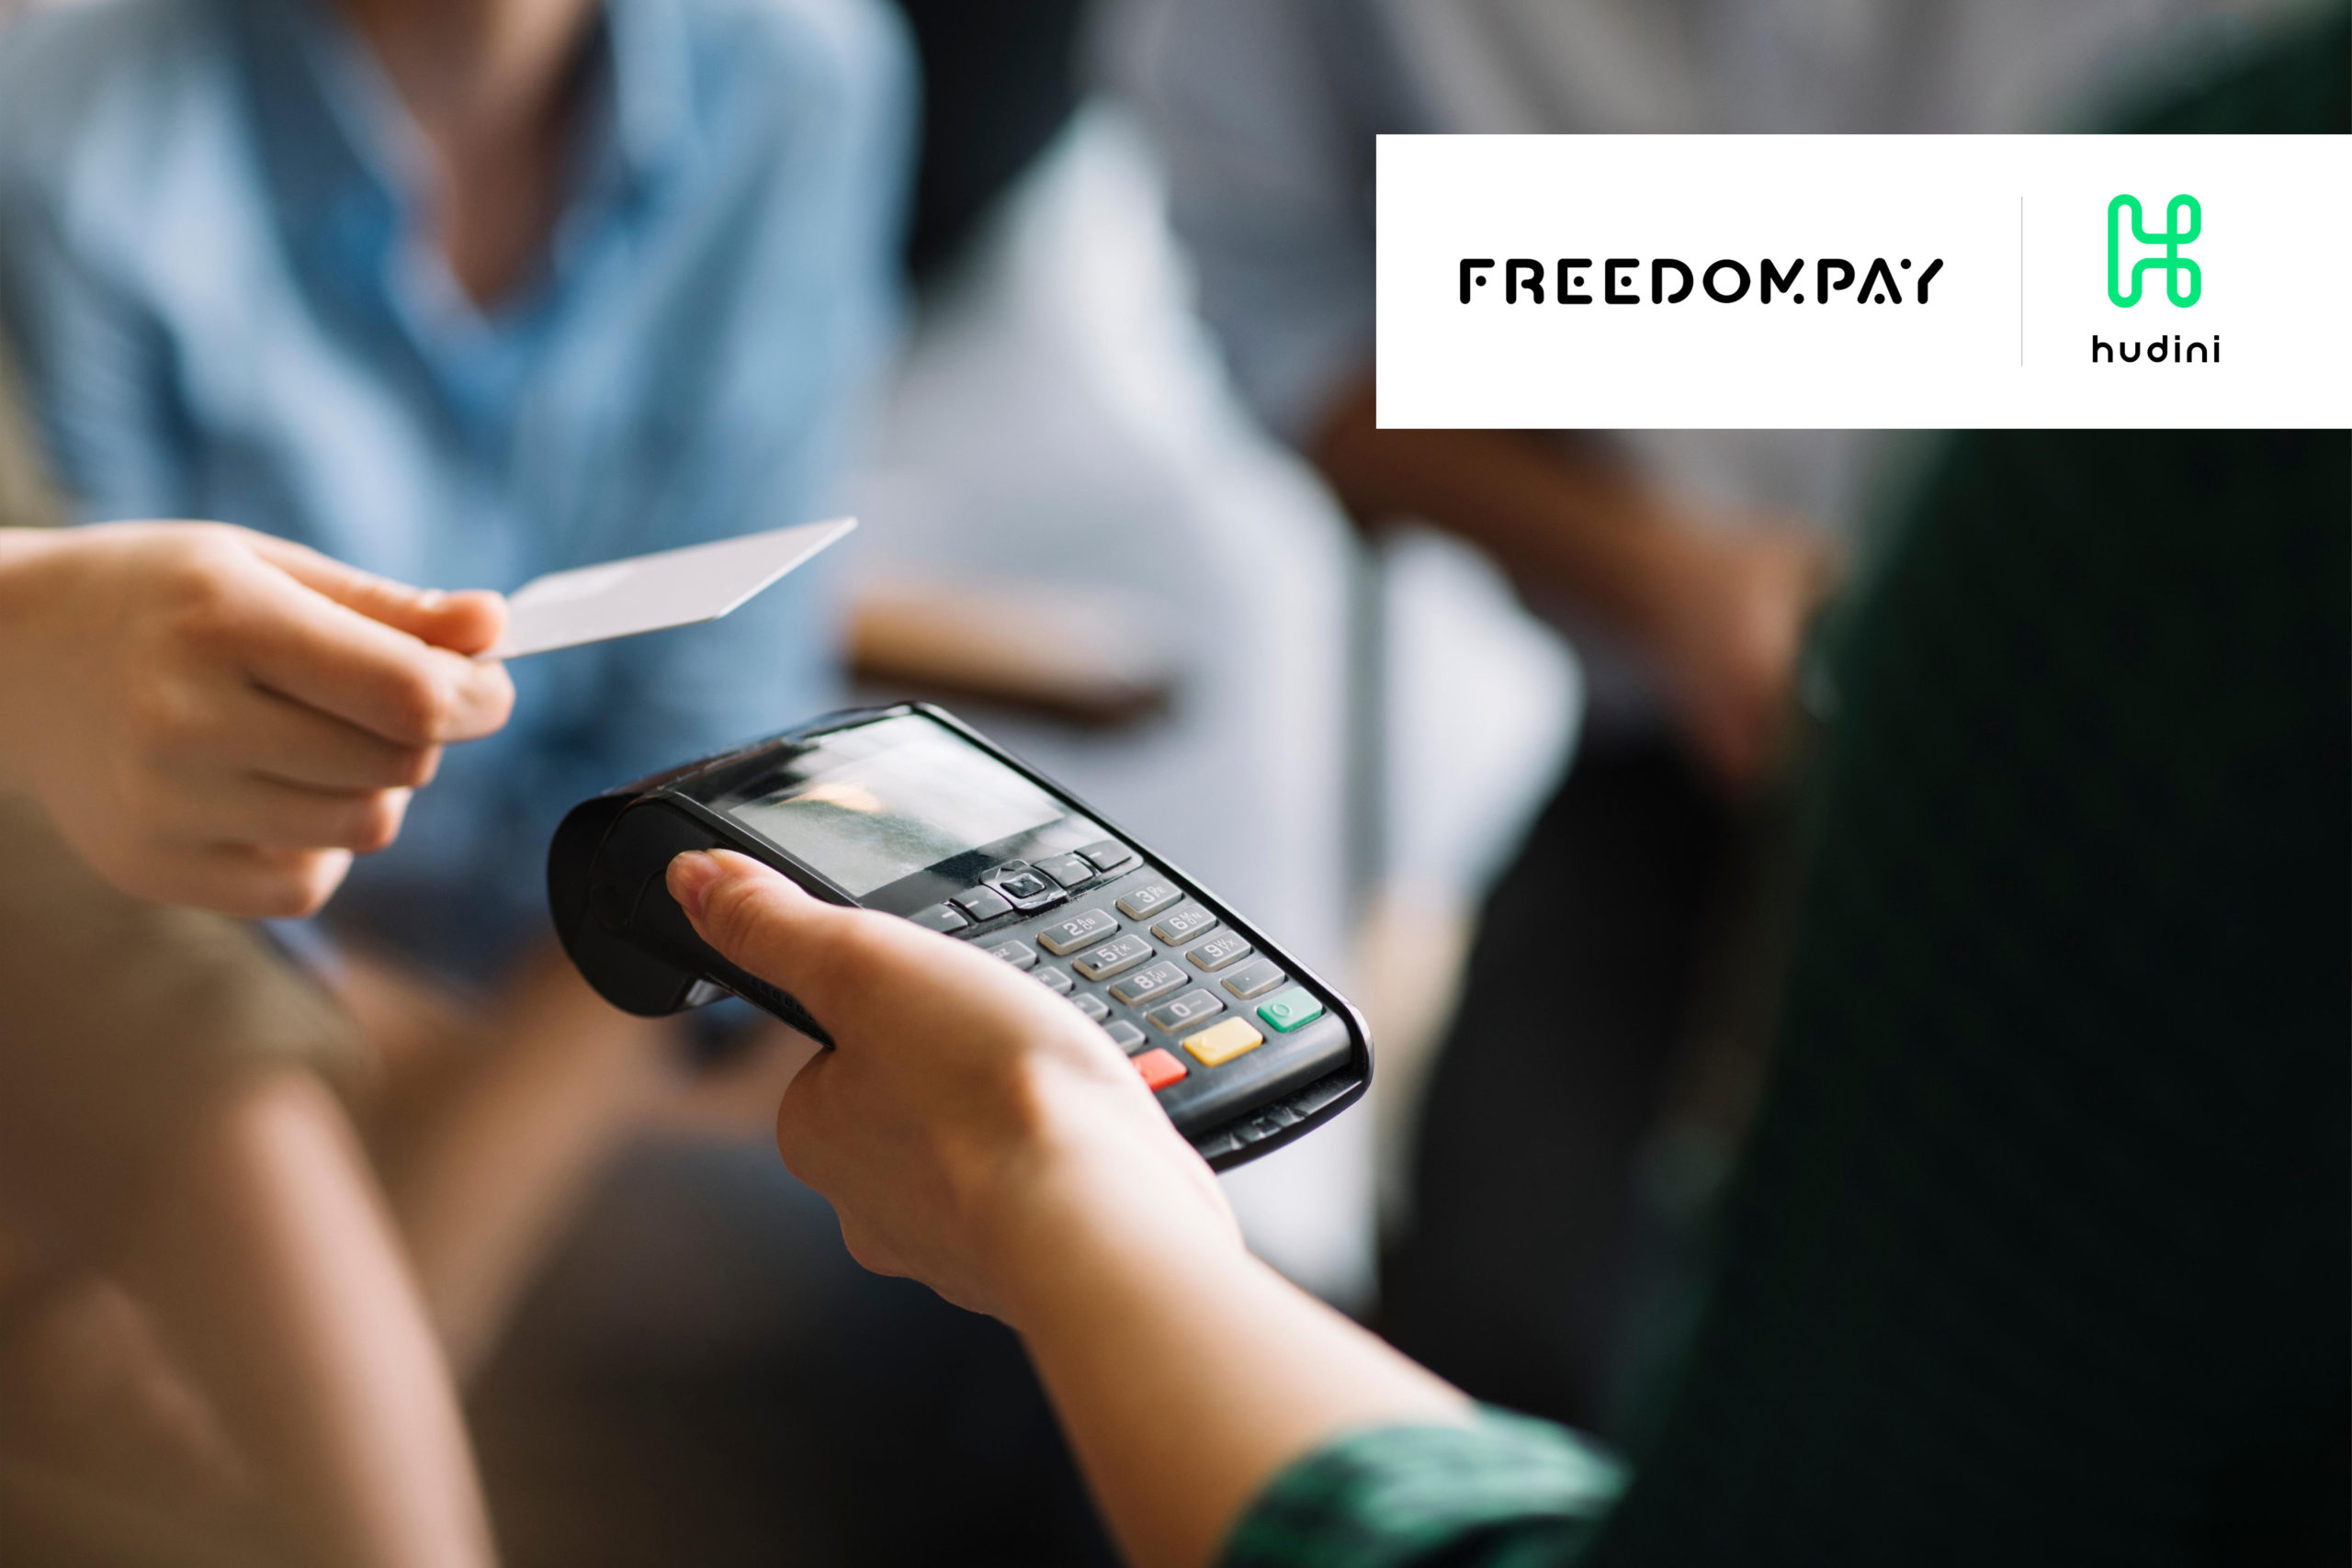 Hudini and FreedomPay collaborate to make commerce technology in the hospitality industry future-ready